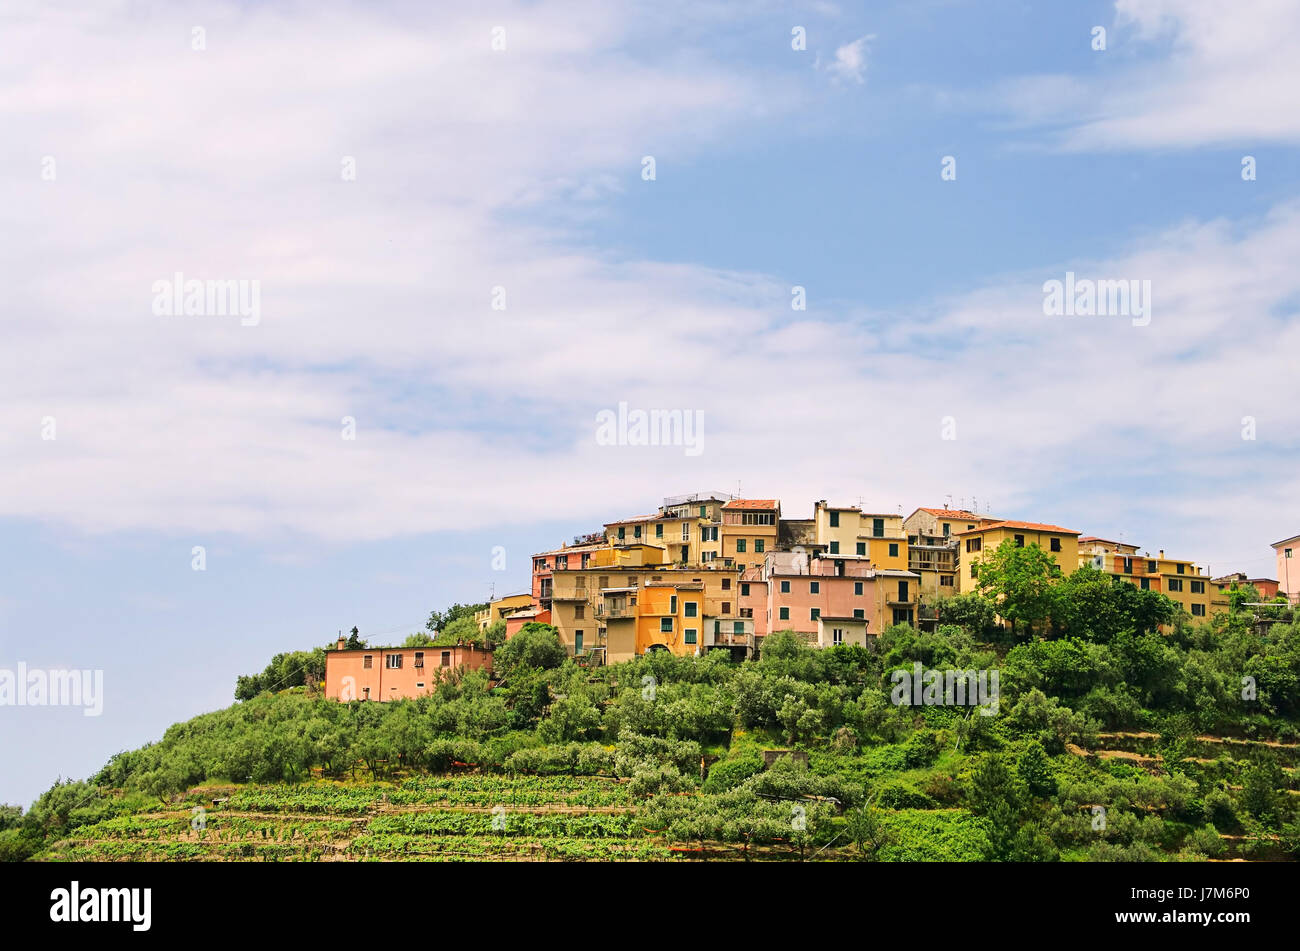 italy house building city town hill coast mediterran place reef cliff community Stock Photo